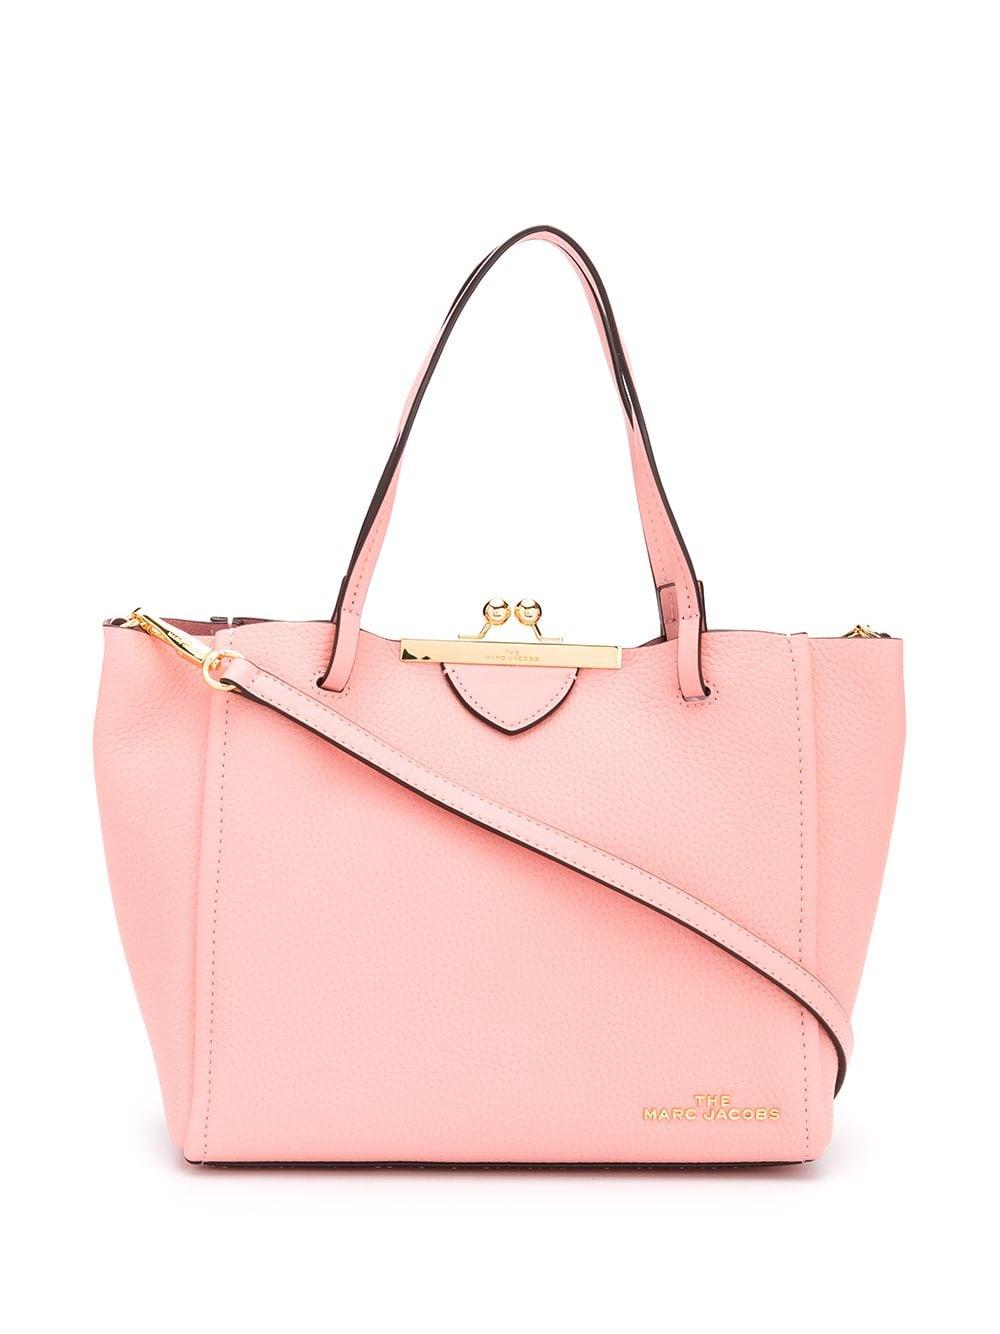 Marc Jacobs Leather The Kiss Lock Mini Tote Bag in Pink - Lyst